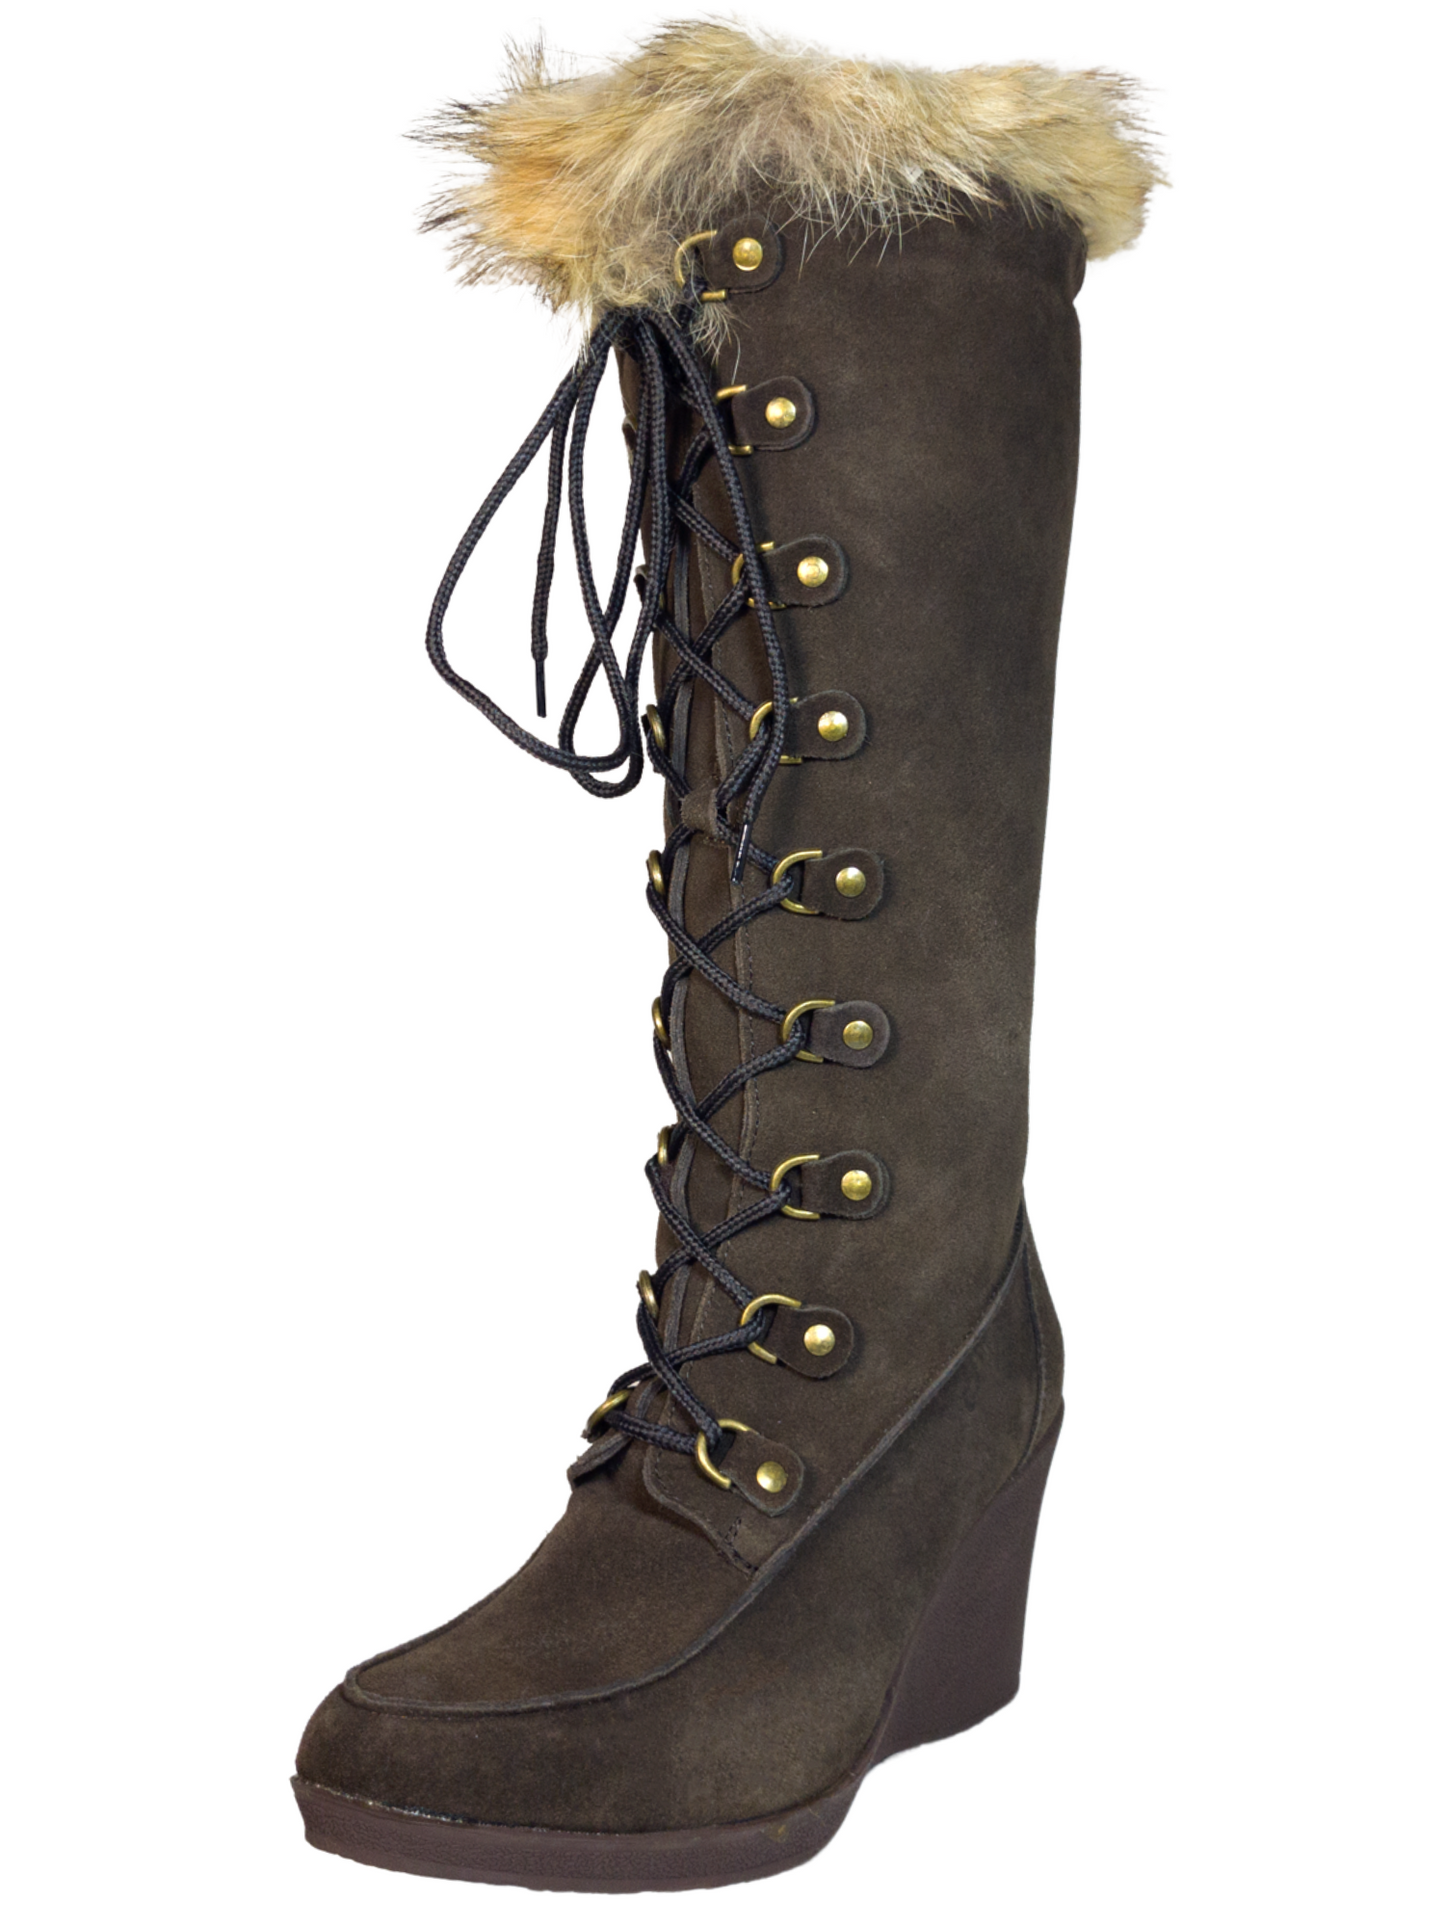 Suede Leather / Fox Hair Wedge Winter Boots for Women 'Bearpaw' - ID: 7133